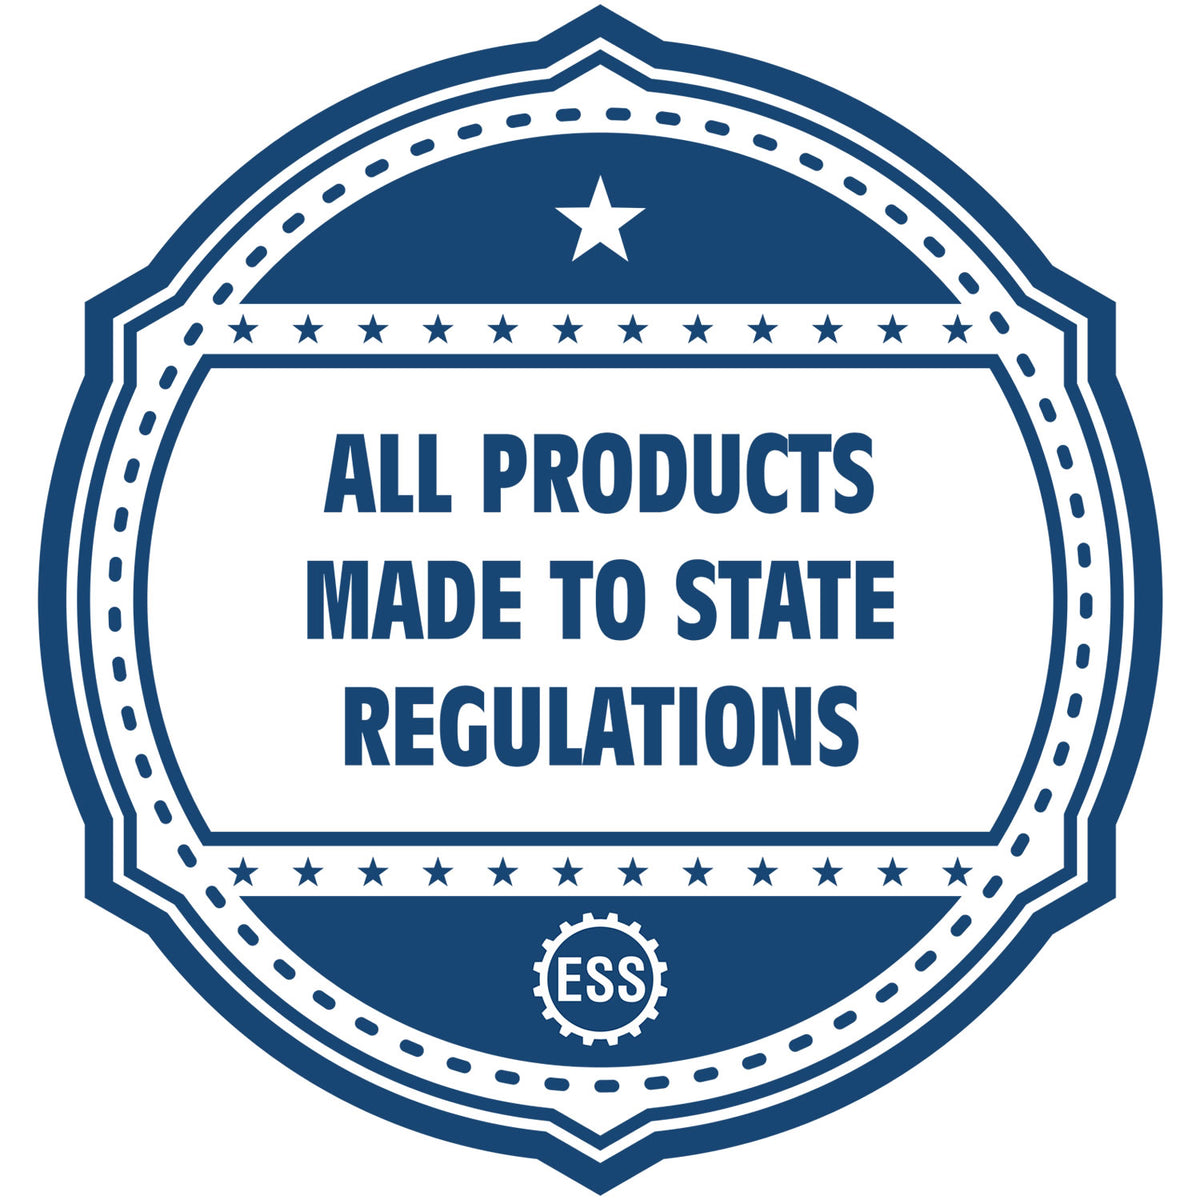 An icon or badge element for the Digital New Mexico PE Stamp and Electronic Seal for New Mexico Engineer showing that this product is made in compliance with state regulations.